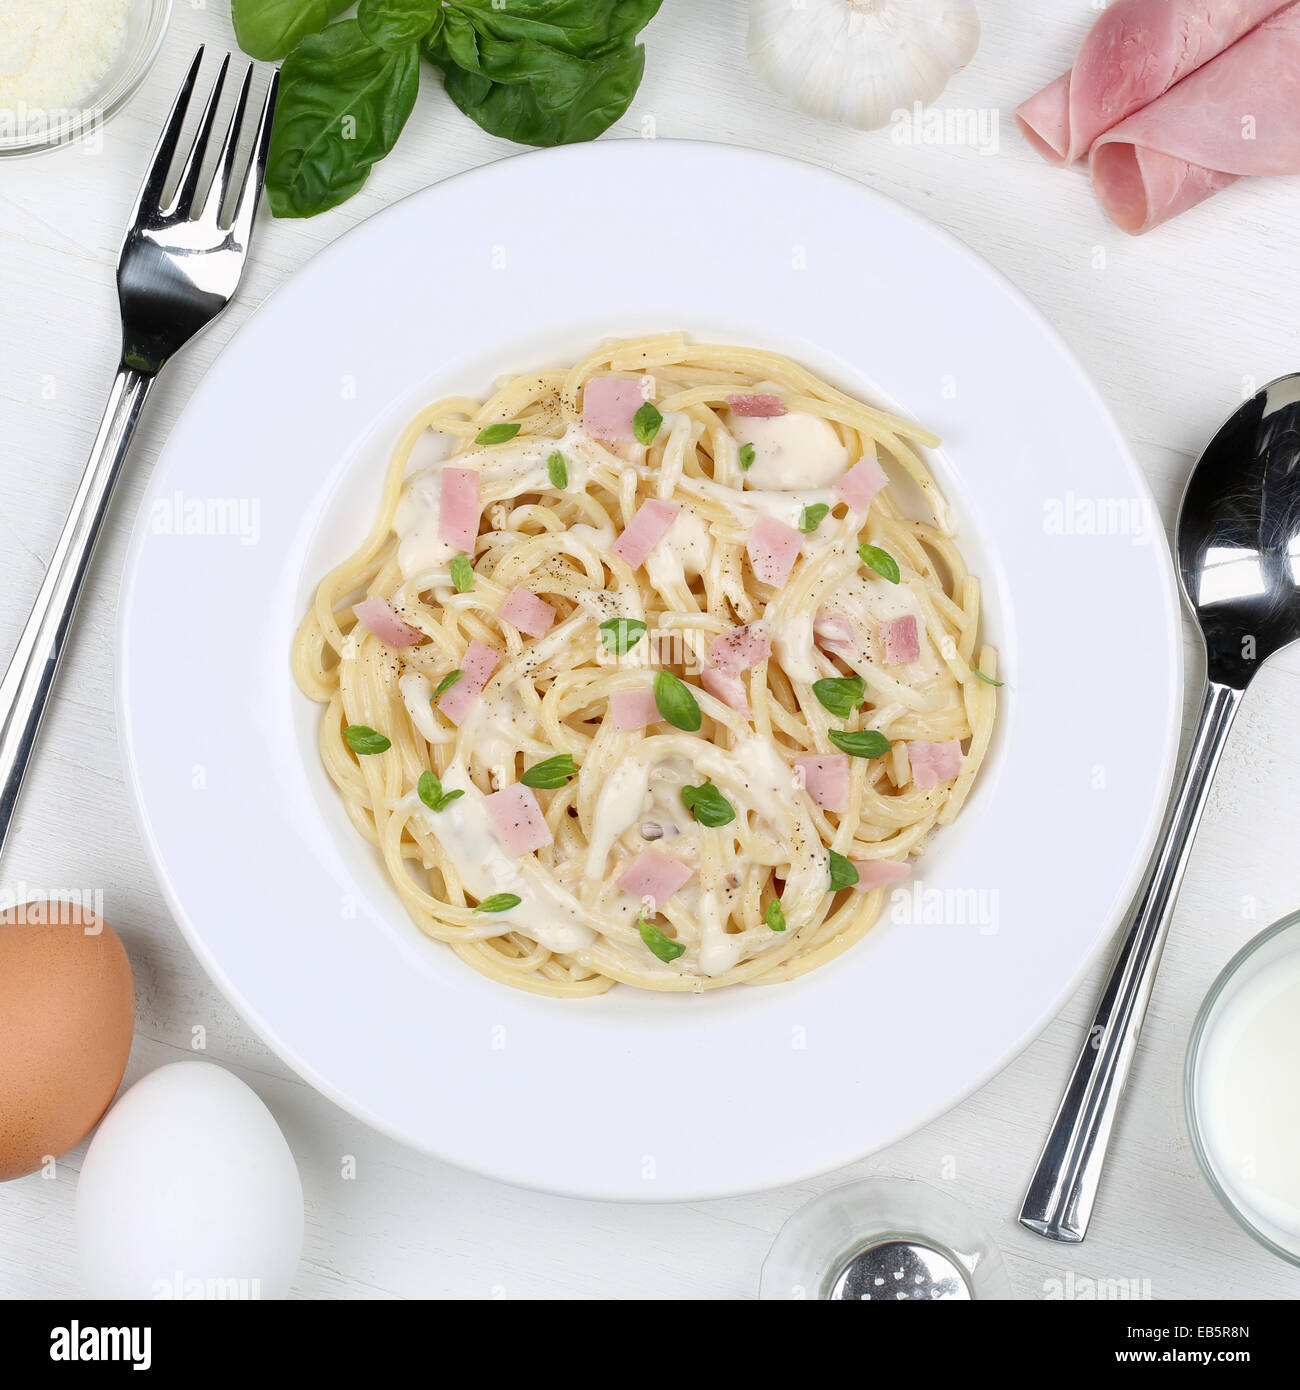 Spaghetti Carbonara pasta meal on a plate from above Stock Photo